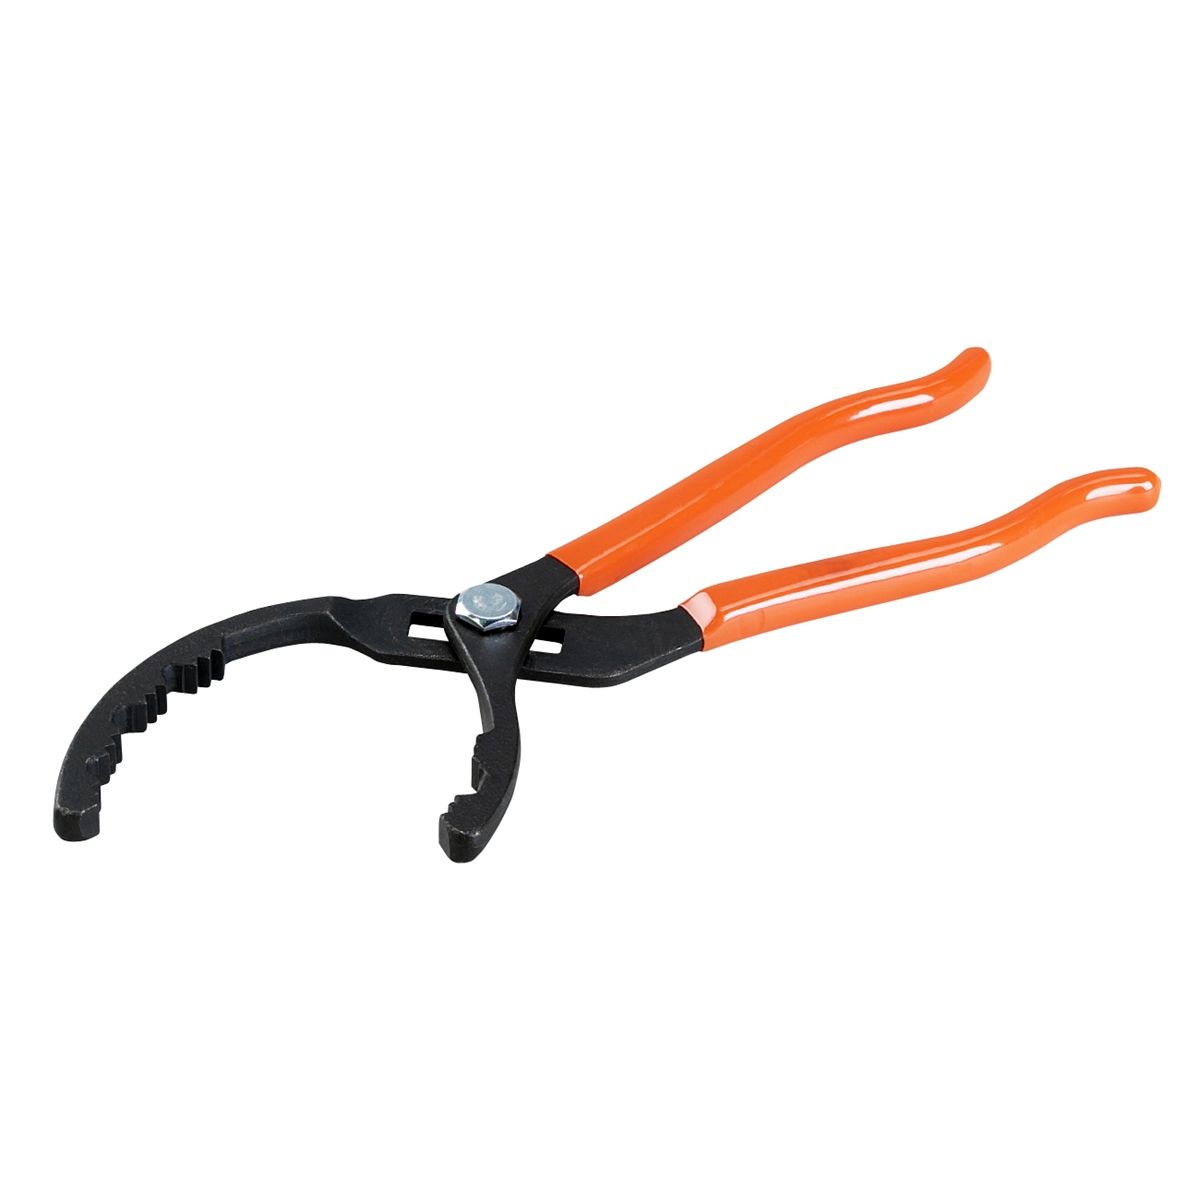 Small Adjustable Oil Filter Pliers 2-1/4" - 5"